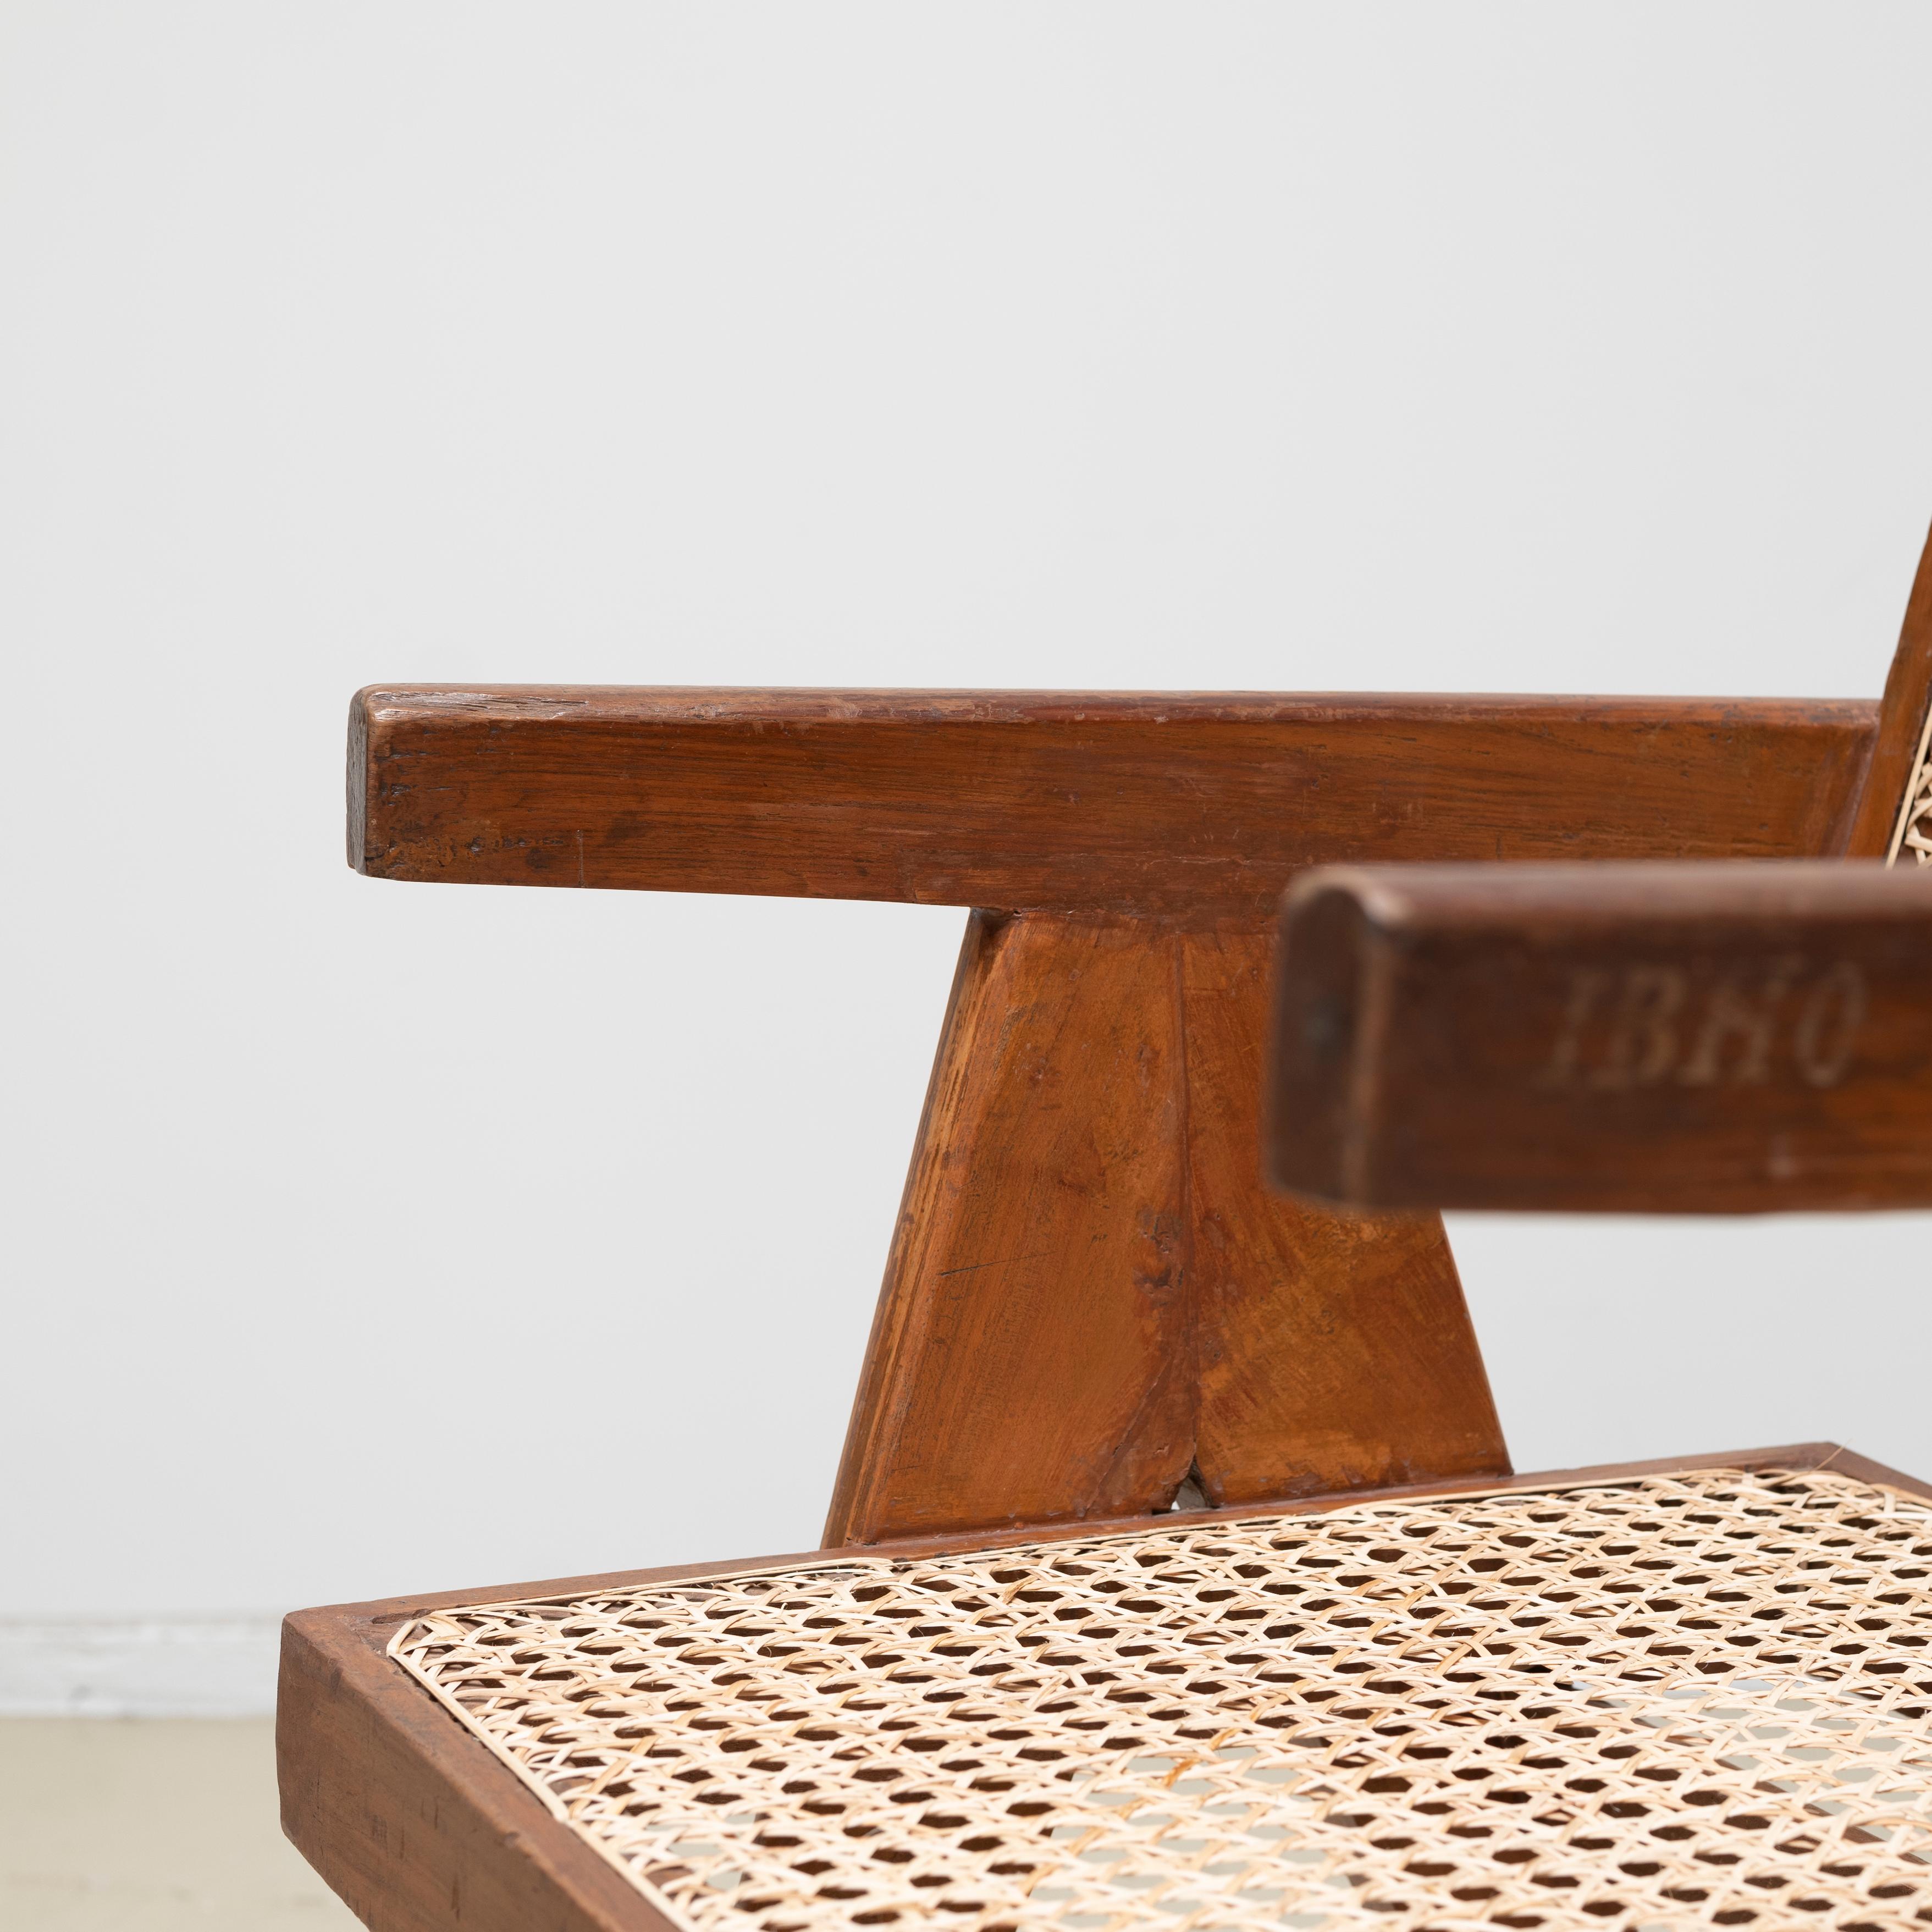 Pierre Jeanneret Office Chair, Circa 1955-56, Chandigarh, India For Sale 1